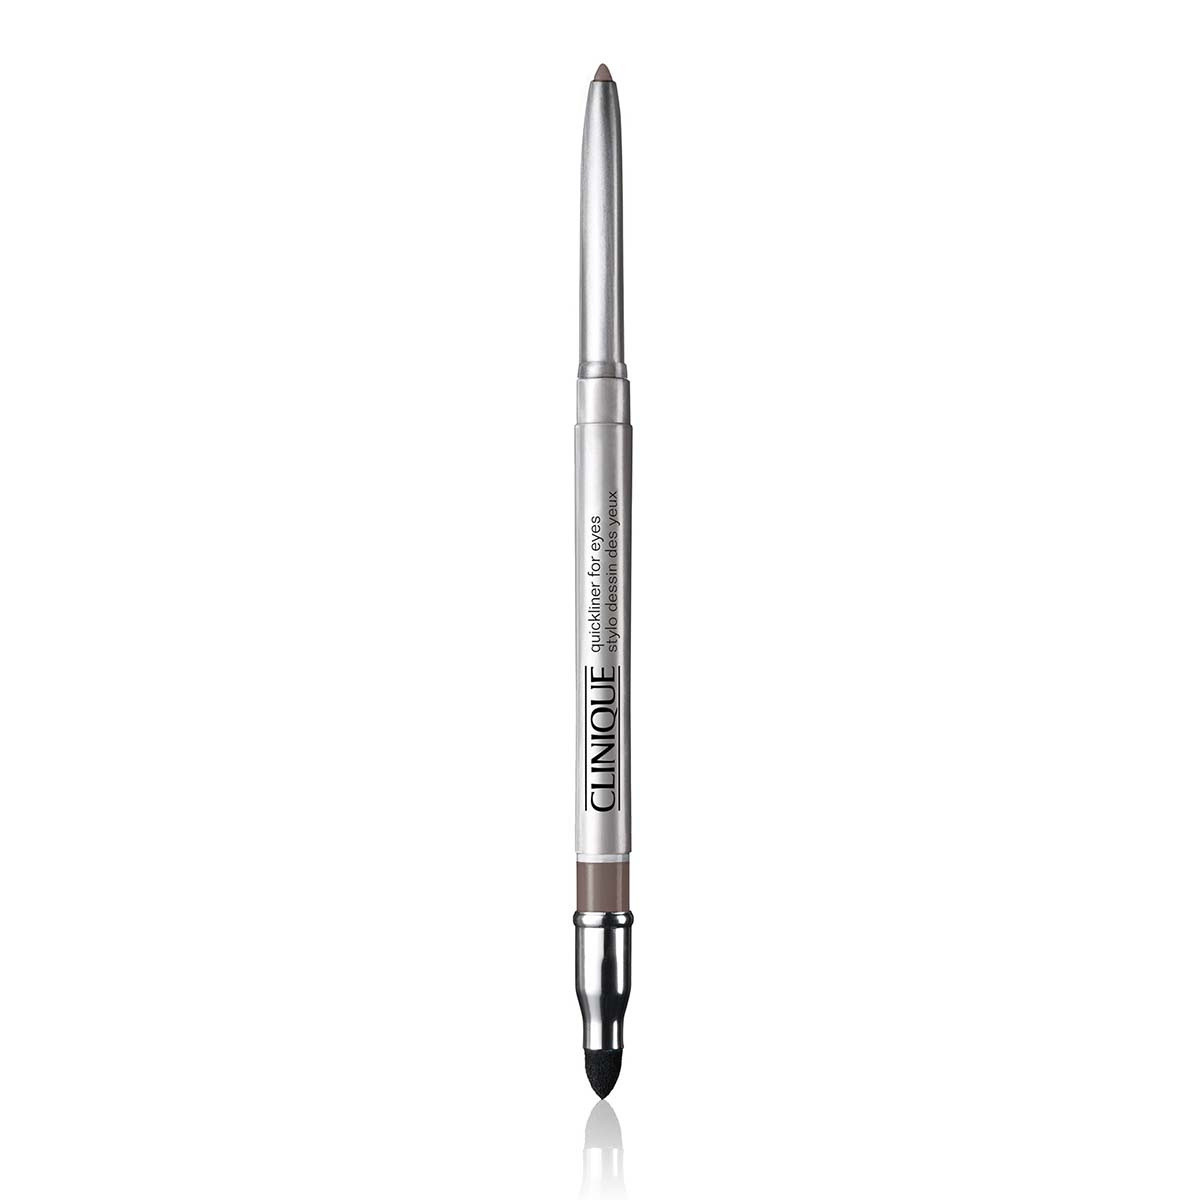 Clinique quickliner for eyes - 02 smoky brown  0,28 g, 02 SMOKY BROWN, large image number 0